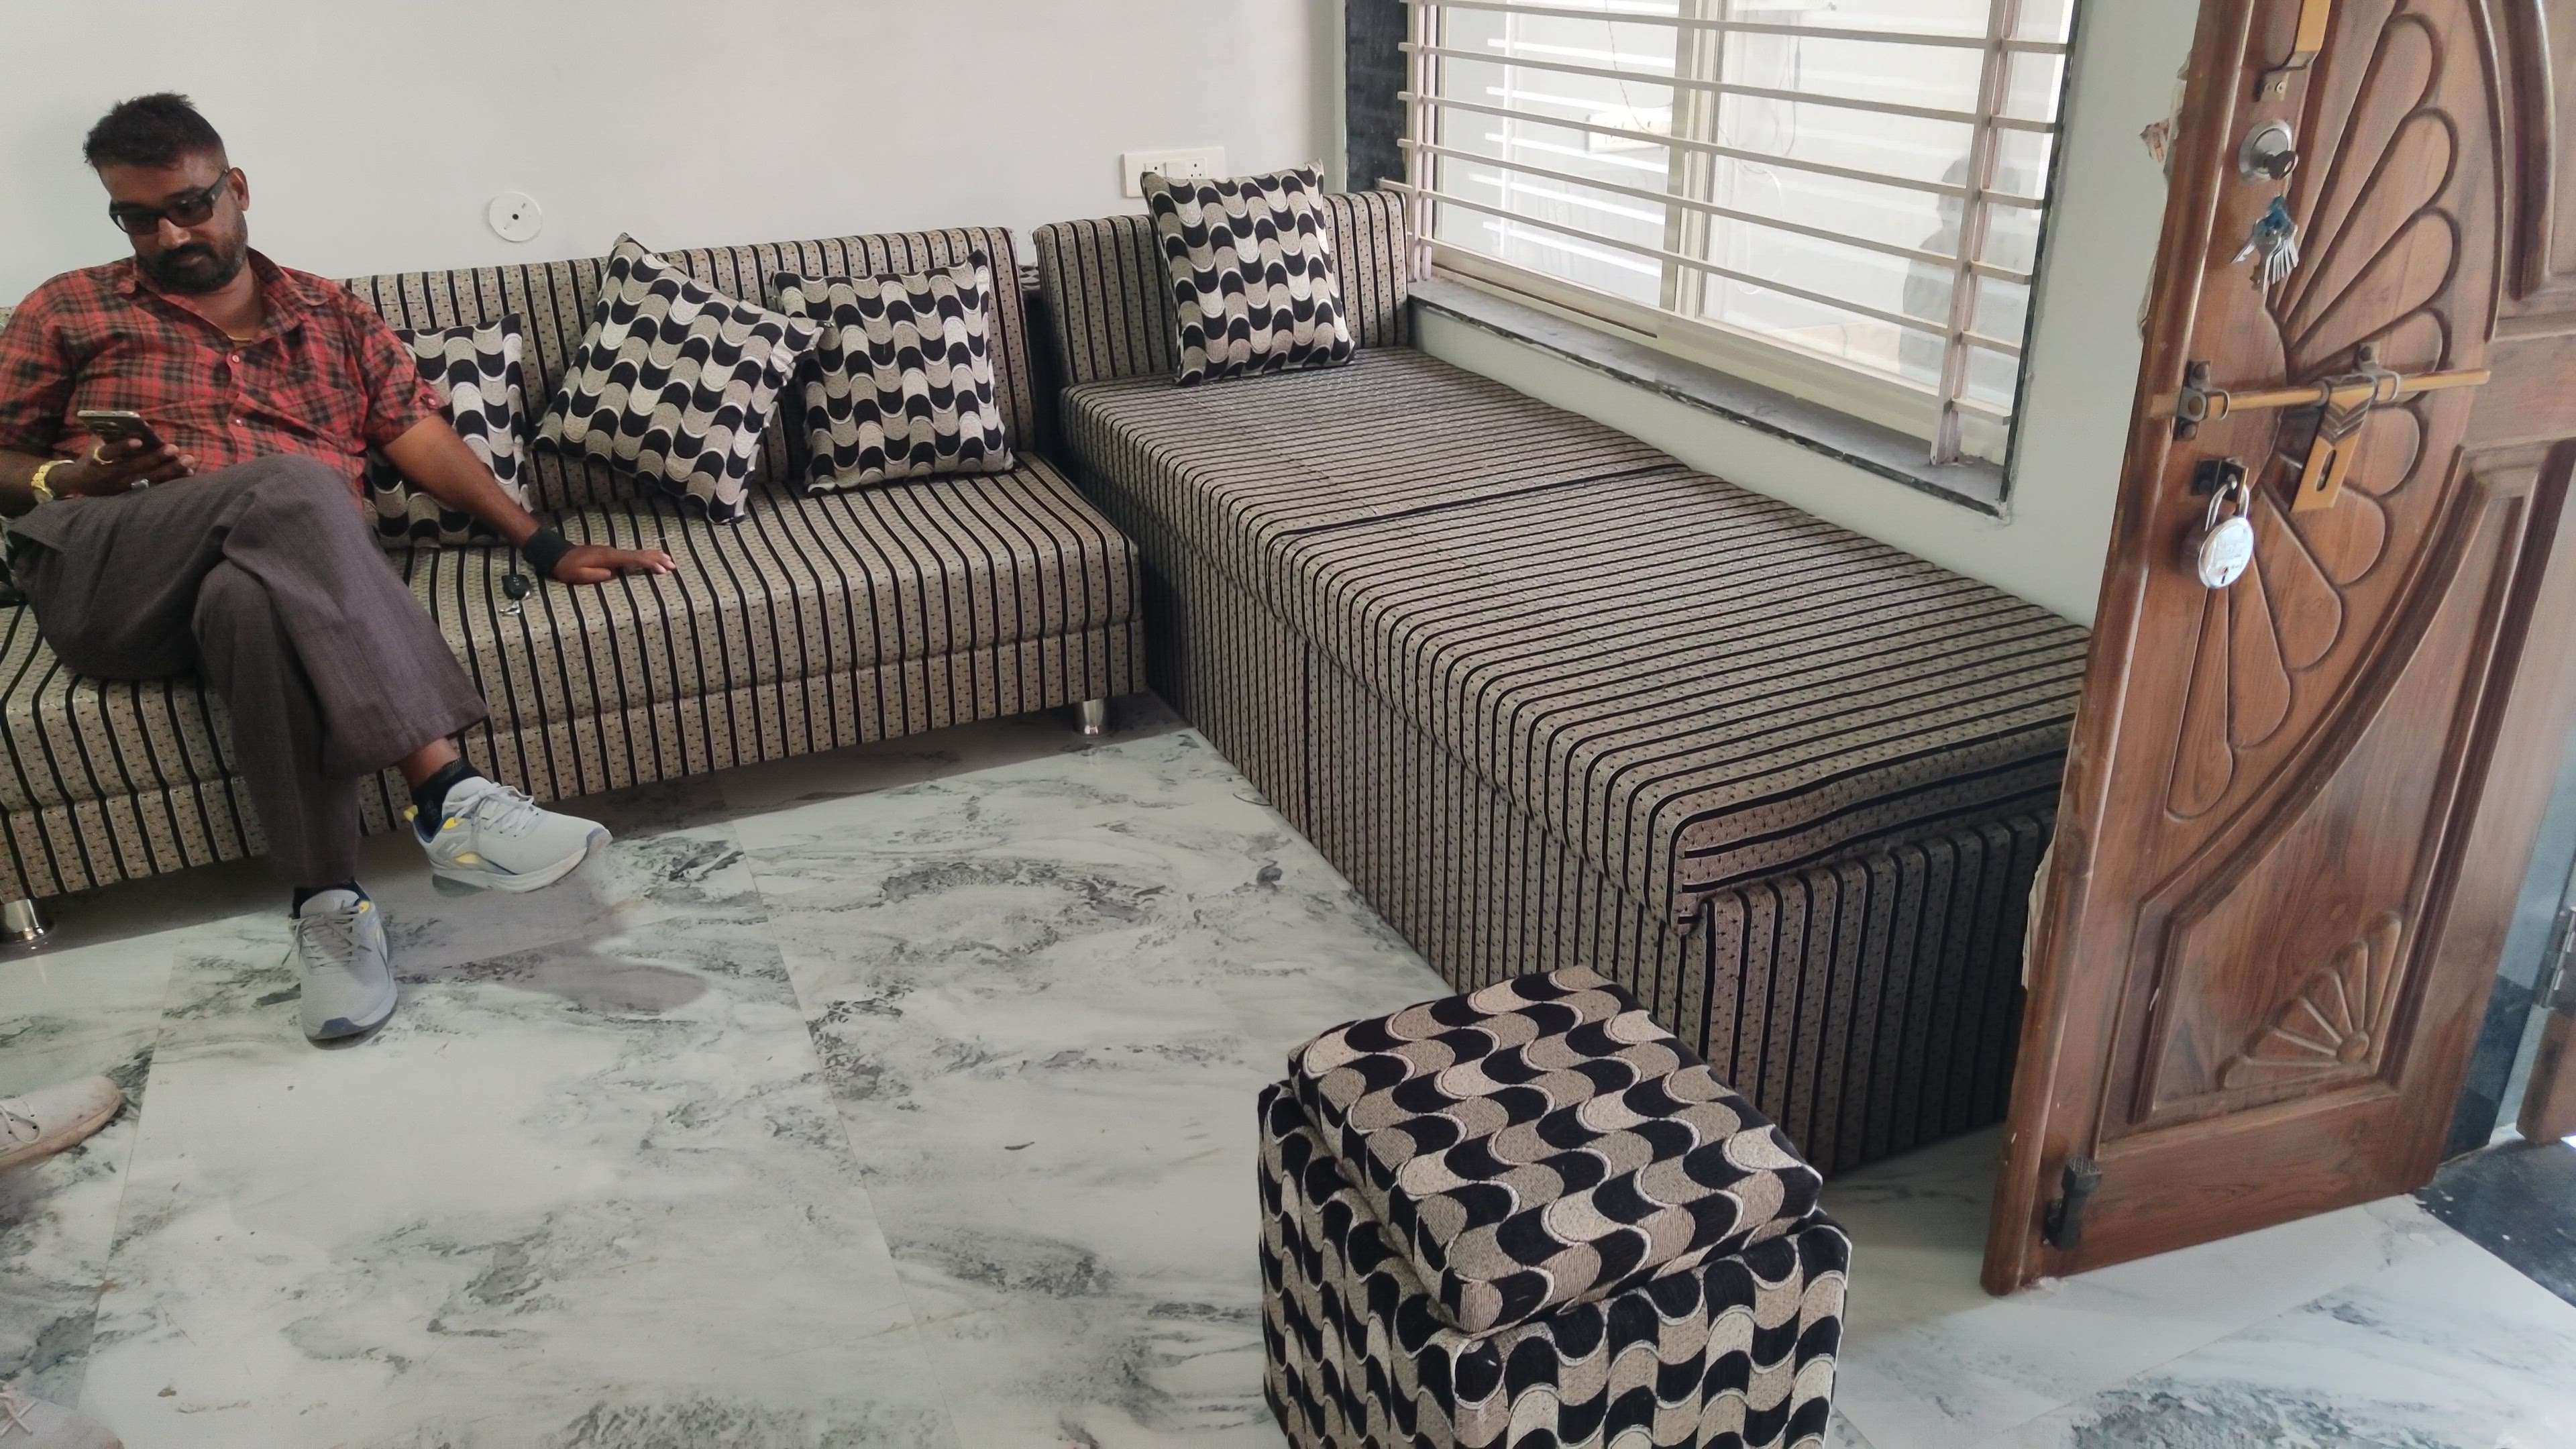 full cushion complete 9 seater sofa and couch couch with material kyunki furniture banate hain Dil se #SouthFacingPlan  #furnitureanddiningtable  #GardeningIdeas